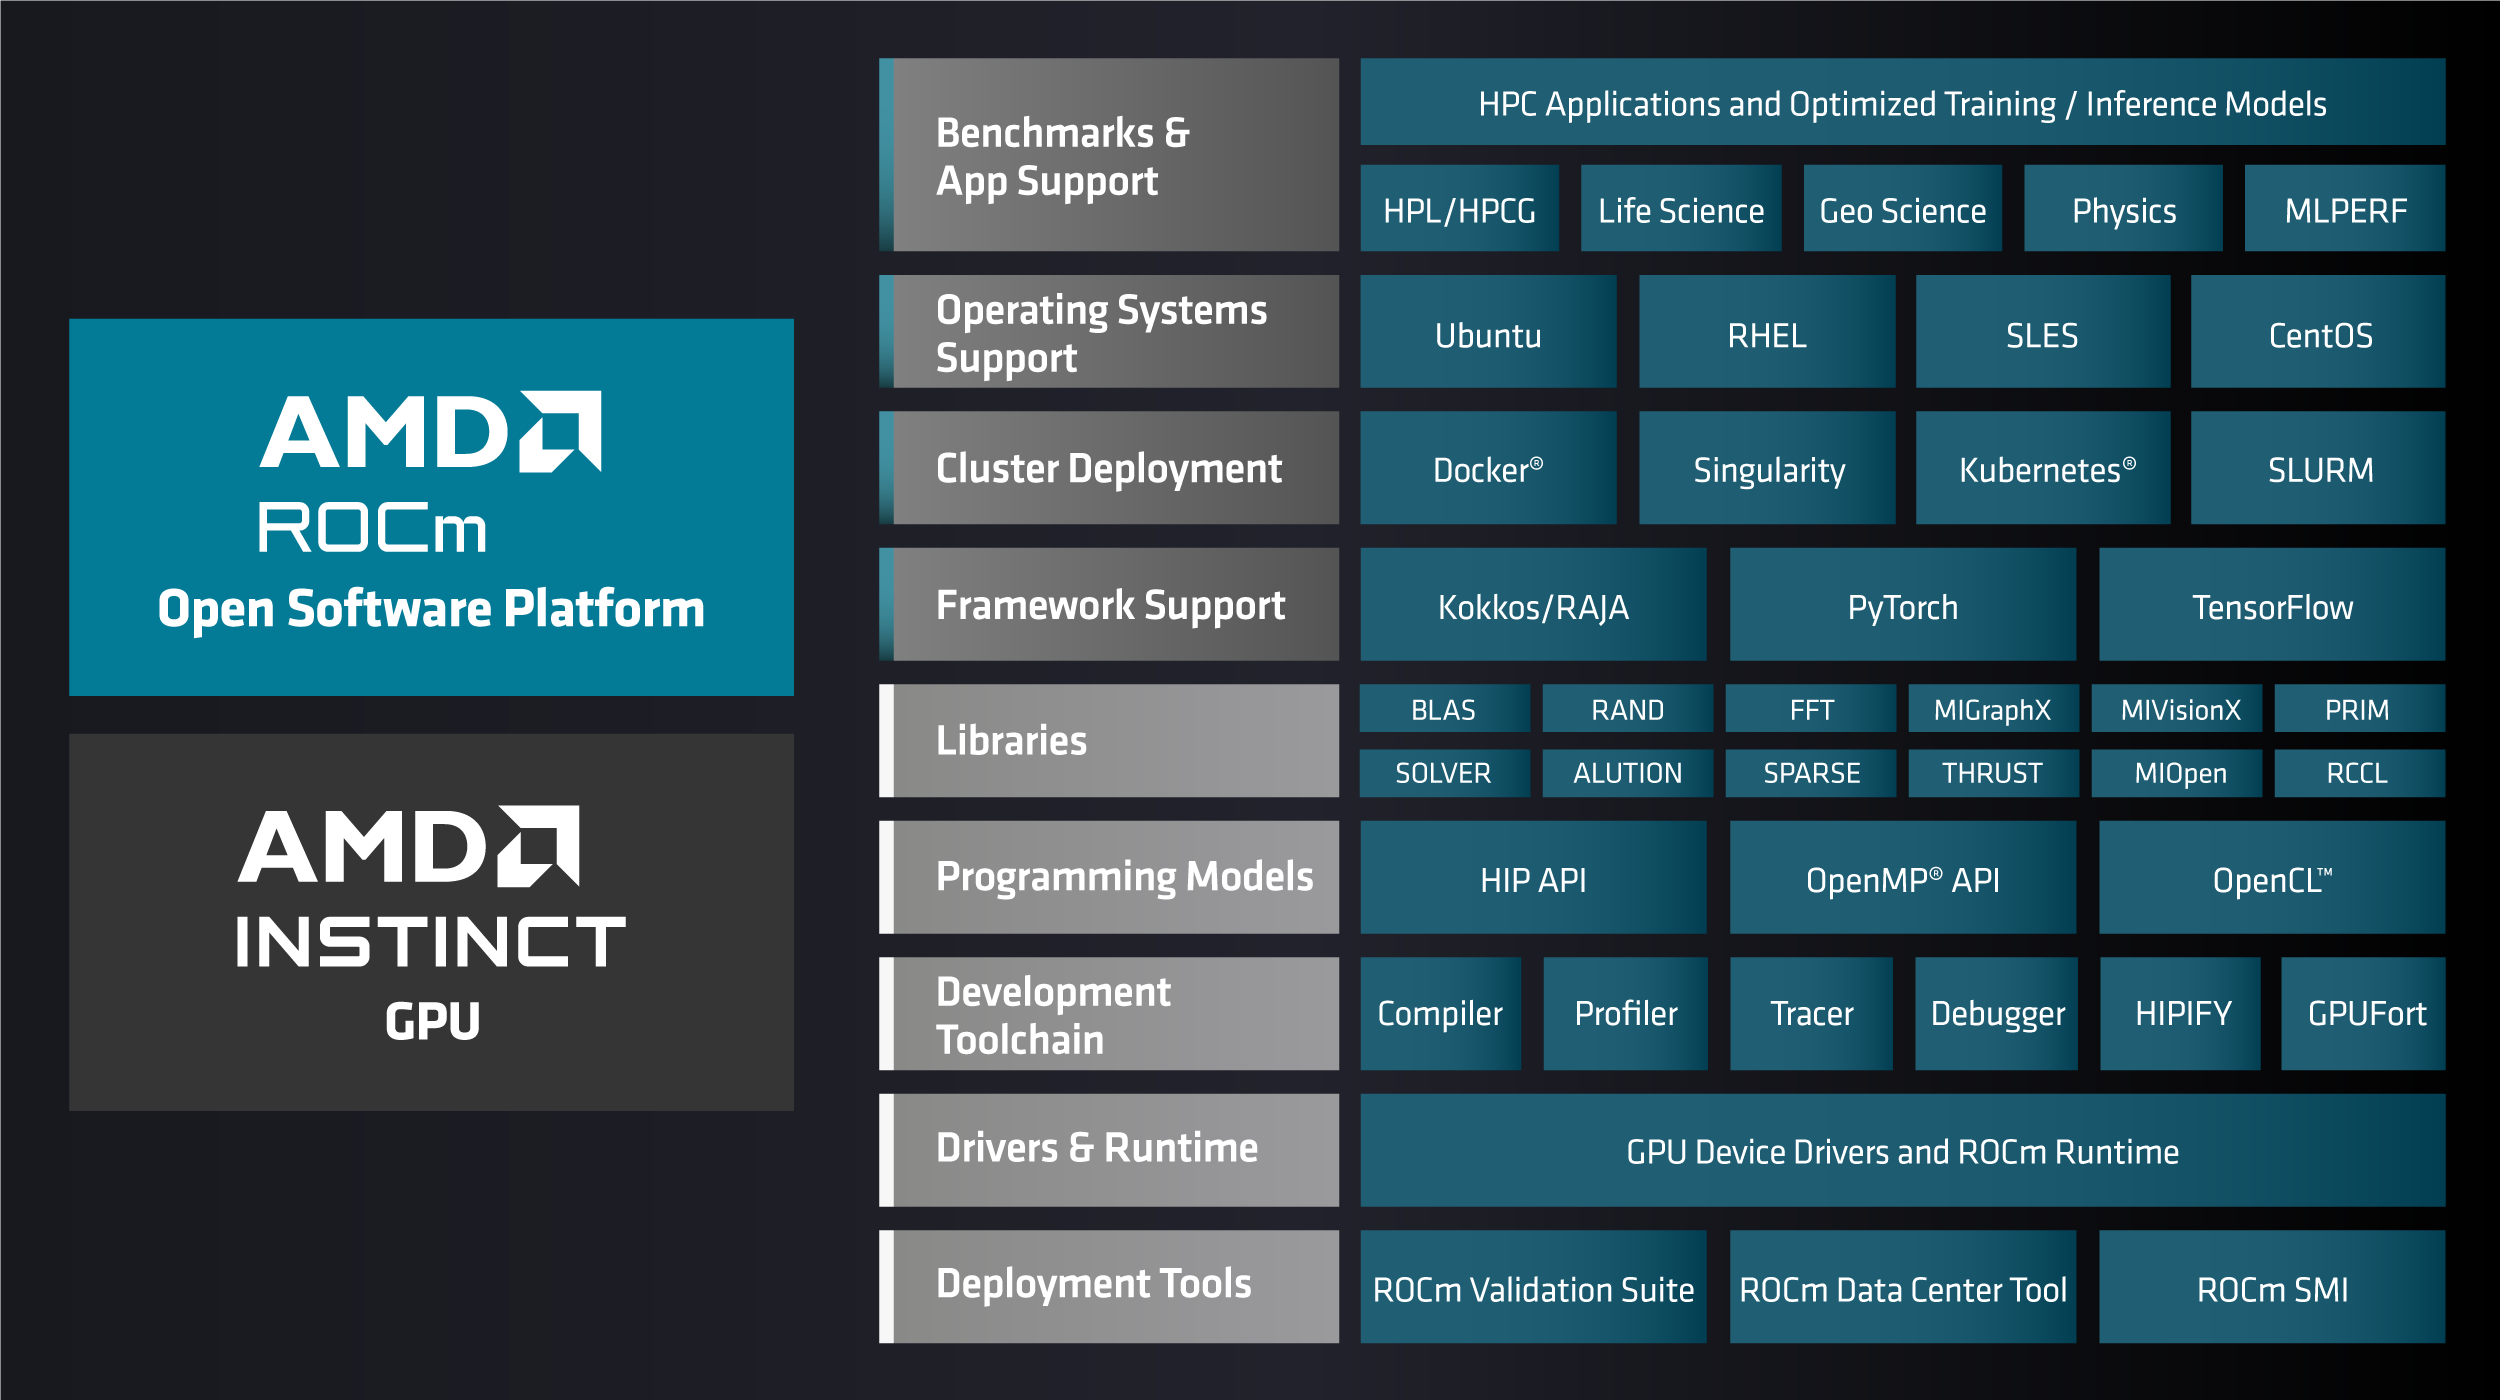 Software and hardware ecosystem surrounding ROCm and AMD Instinct for HPC